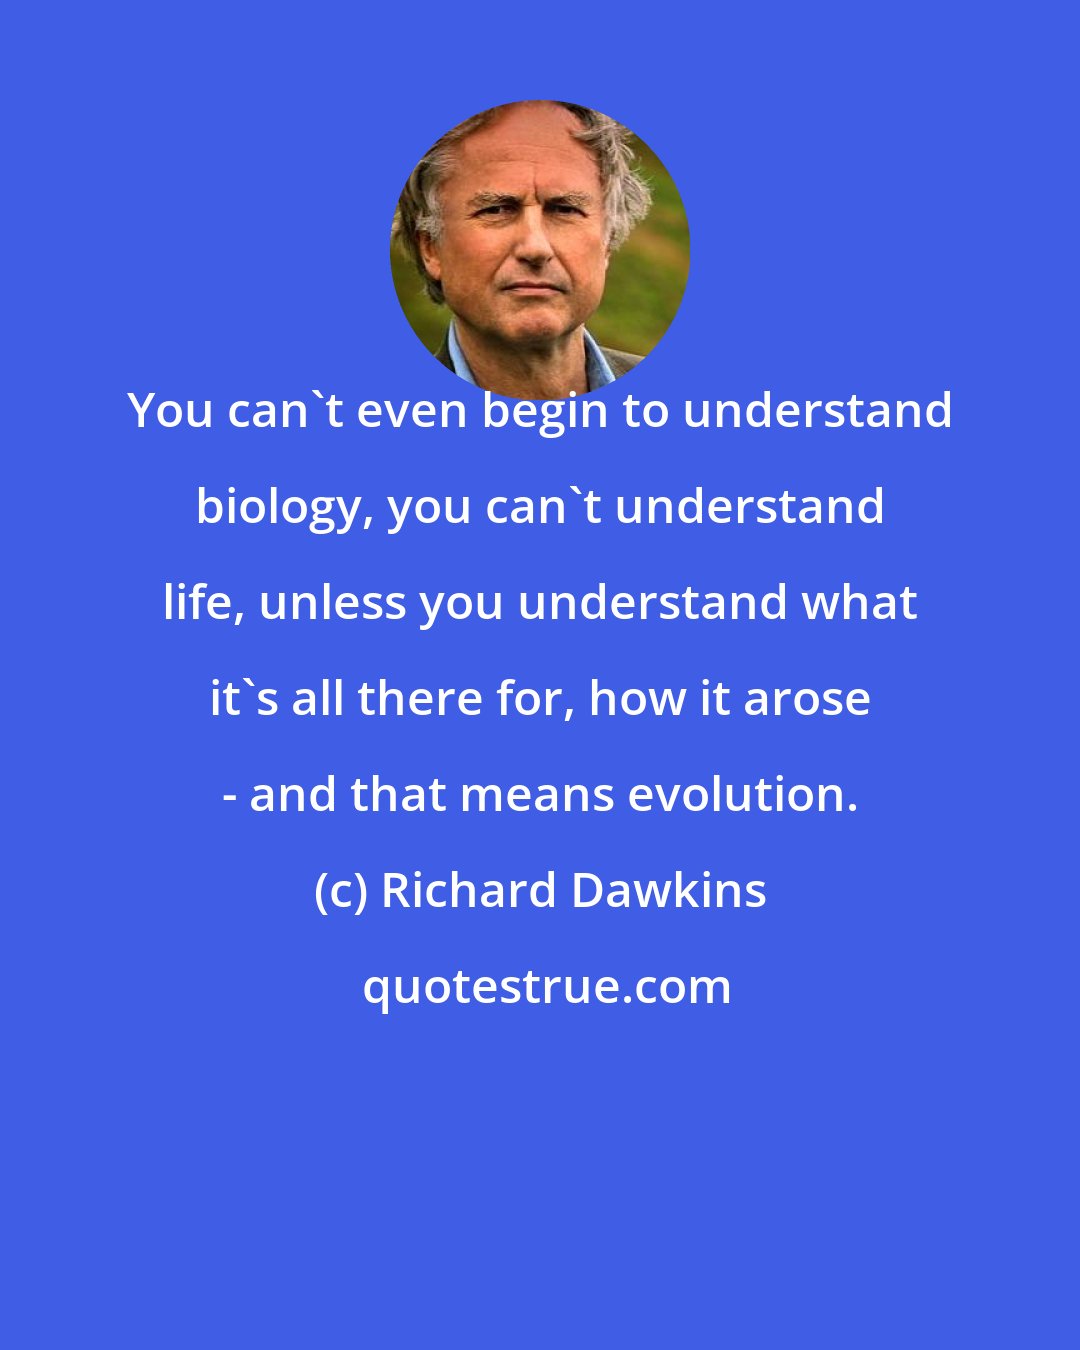 Richard Dawkins: You can't even begin to understand biology, you can't understand life, unless you understand what it's all there for, how it arose - and that means evolution.